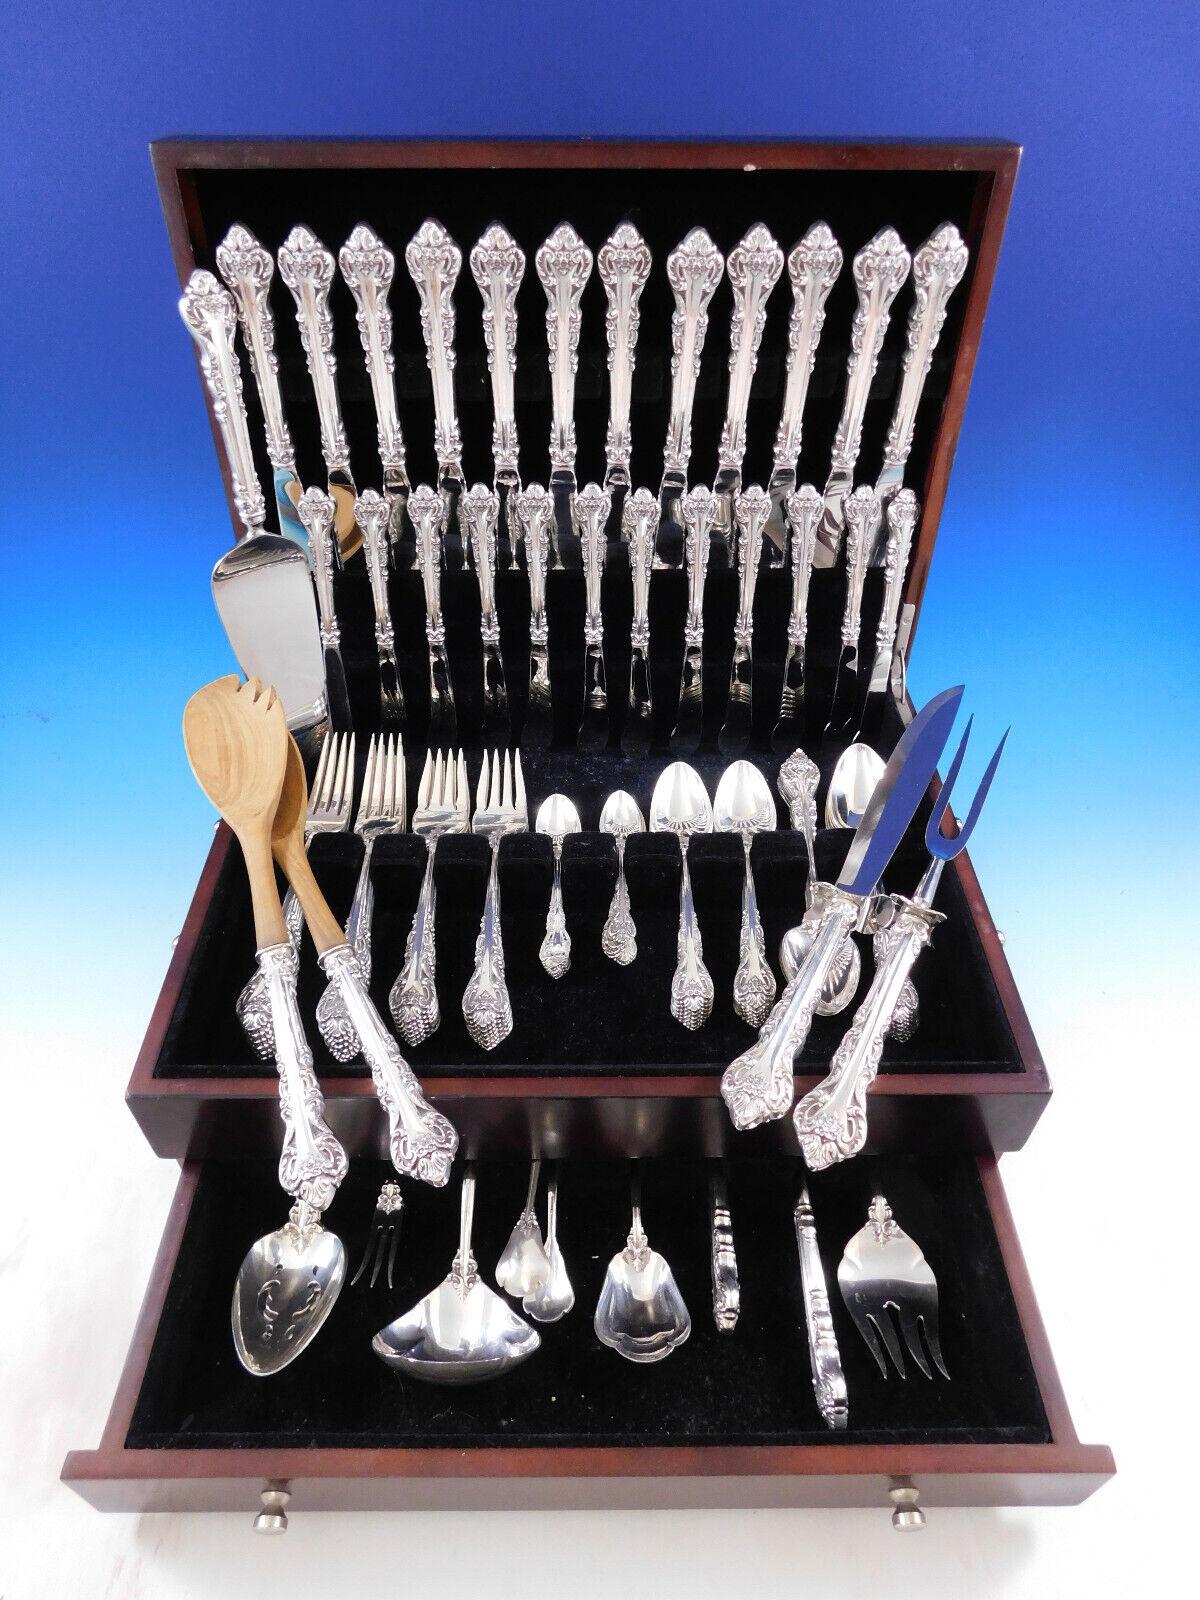 Superb Masterpiece by International sterling silver flatware set - 98 pieces. This set includes:

12 Knives, 9 3/8